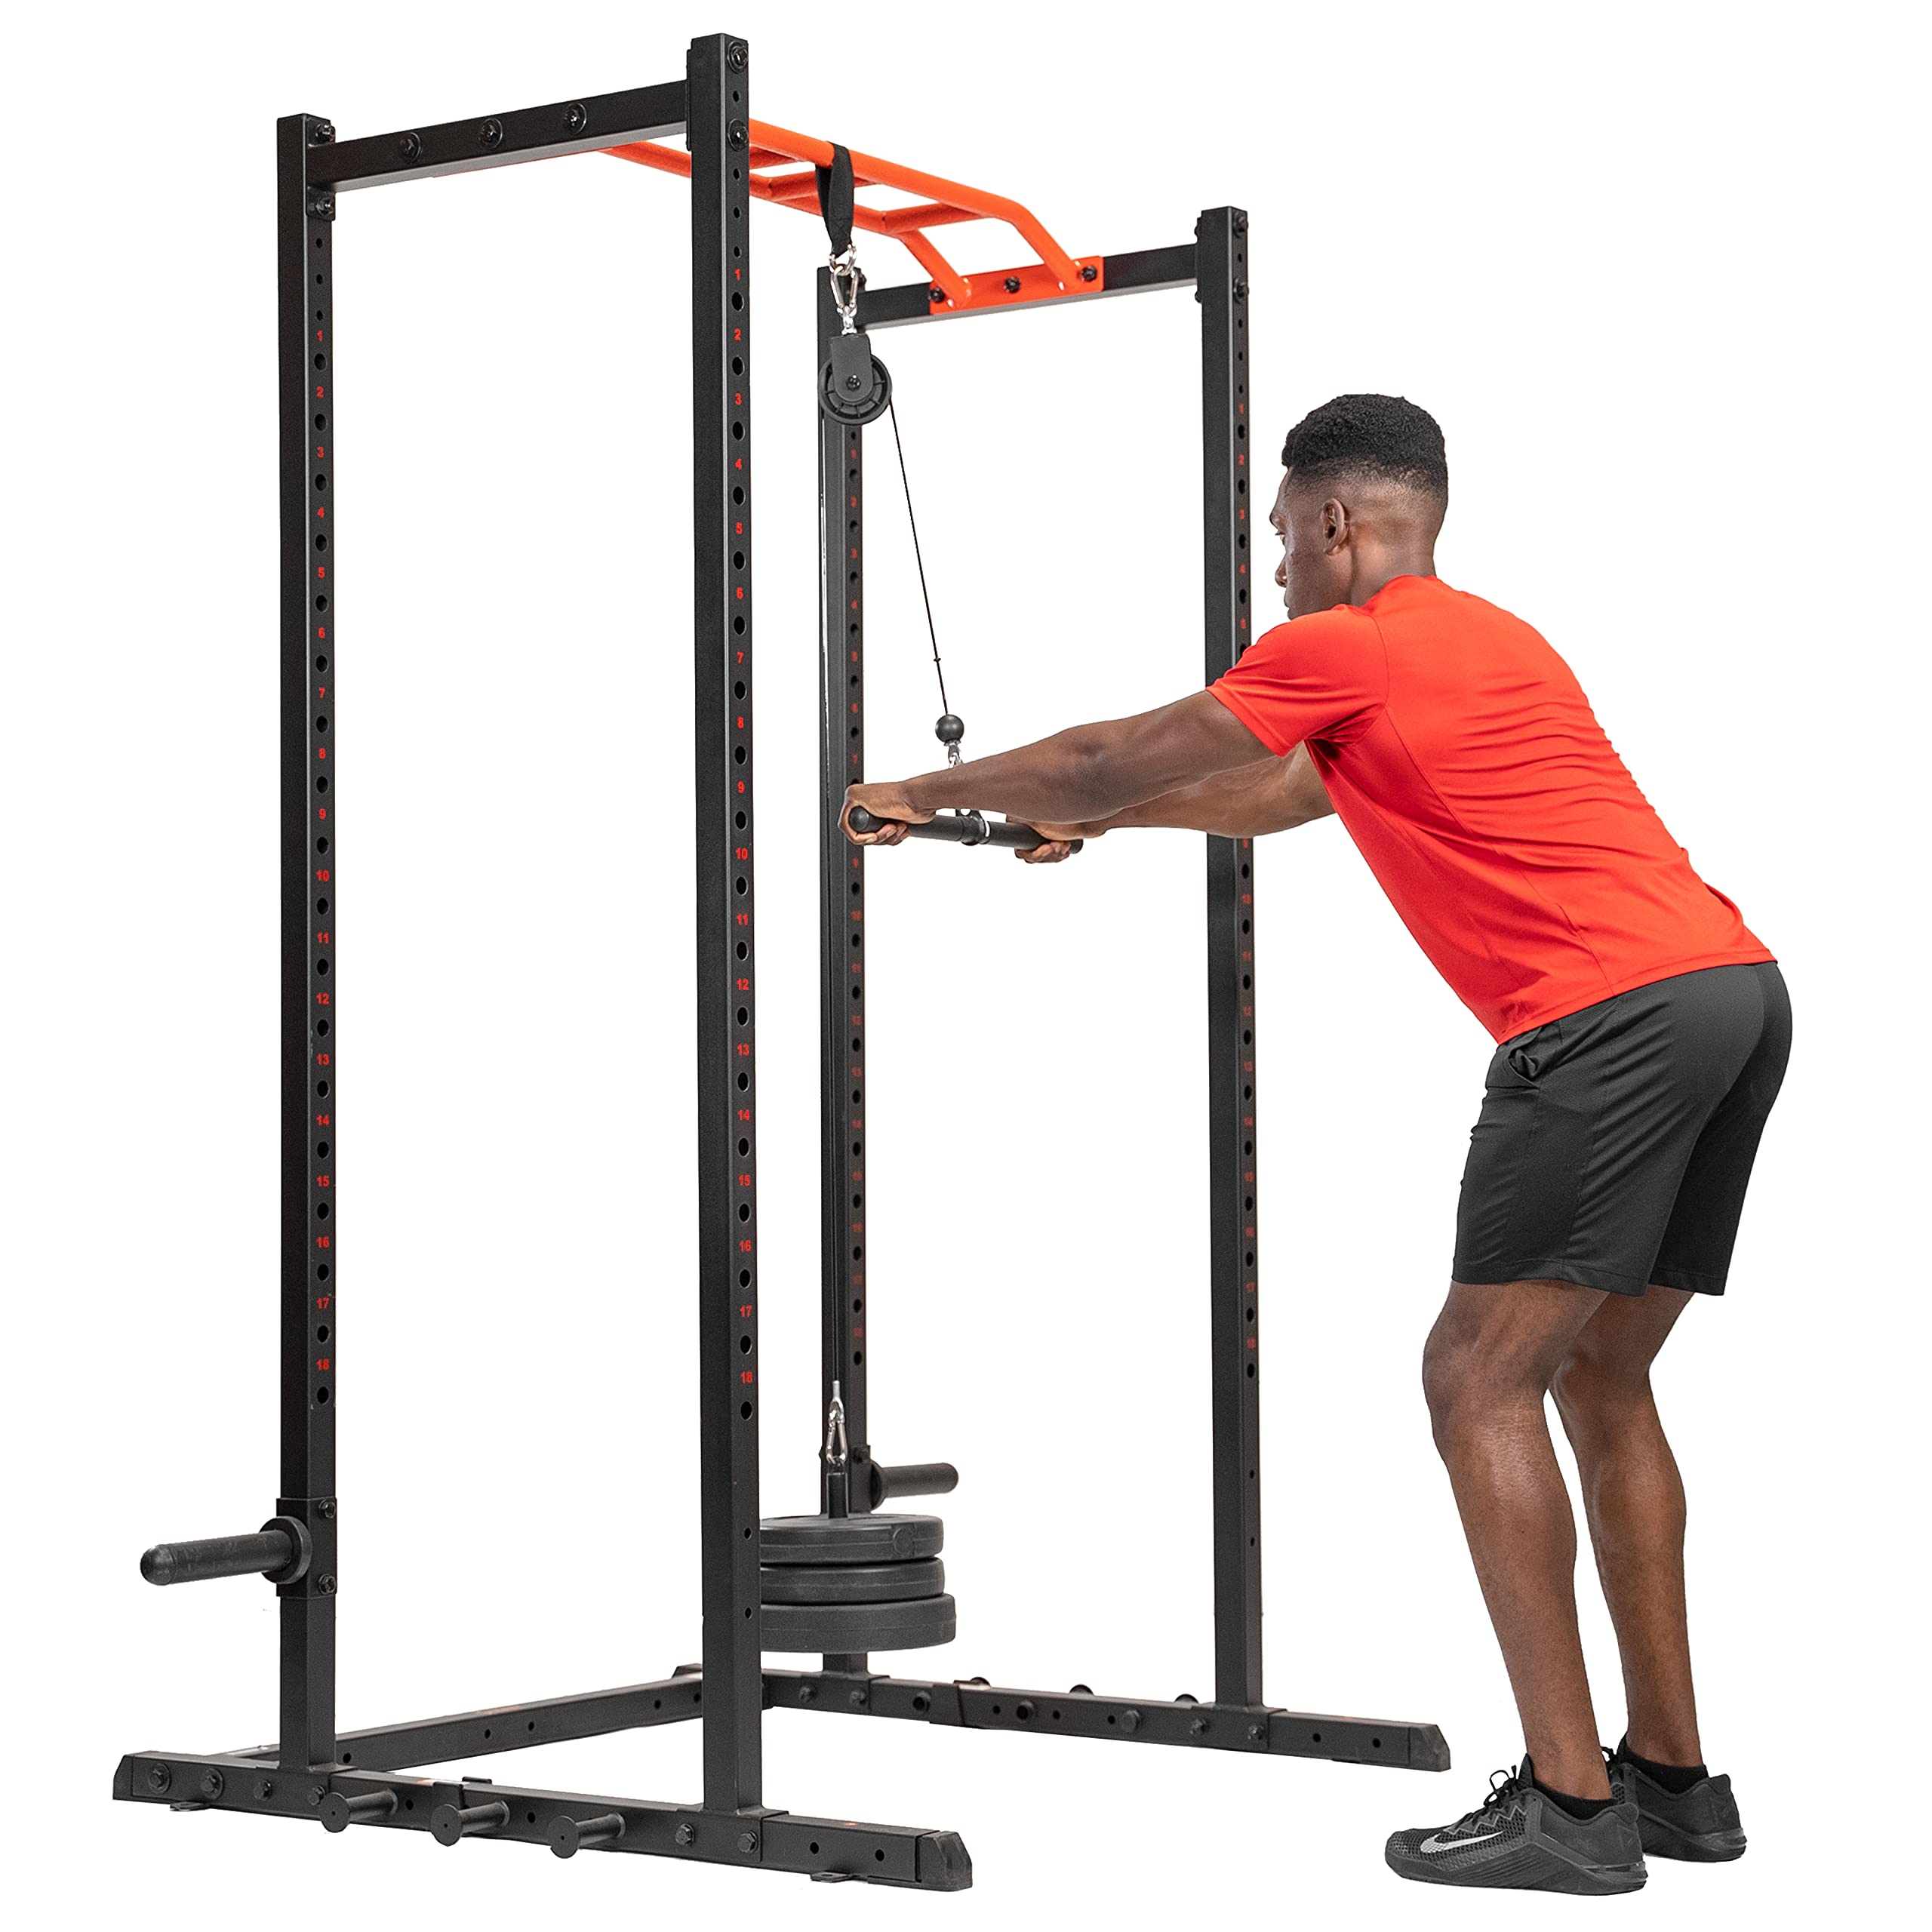 Sunny Health & Fitness Power Rack and Cage Add-on Attachment Accessory: Bar Holder, Dip Bars, J-Hook, LAT Pulldown, Pull Up Bar, Landmine, or U-Ring